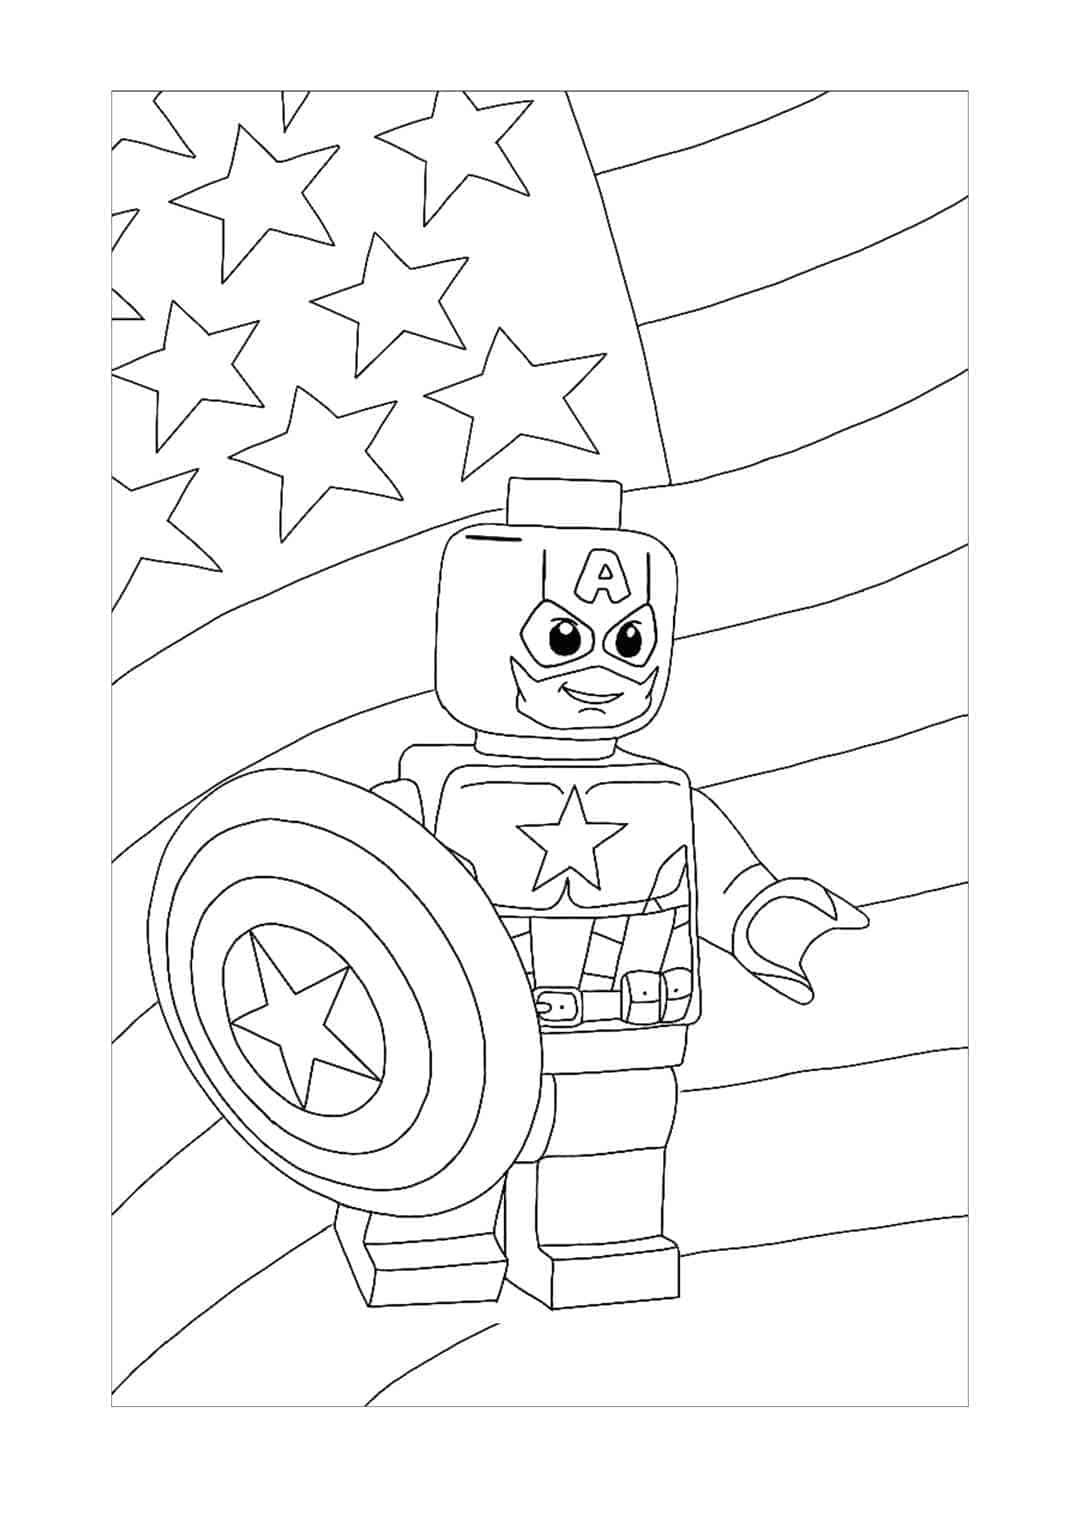 Captain America Lego with Flag coloring page